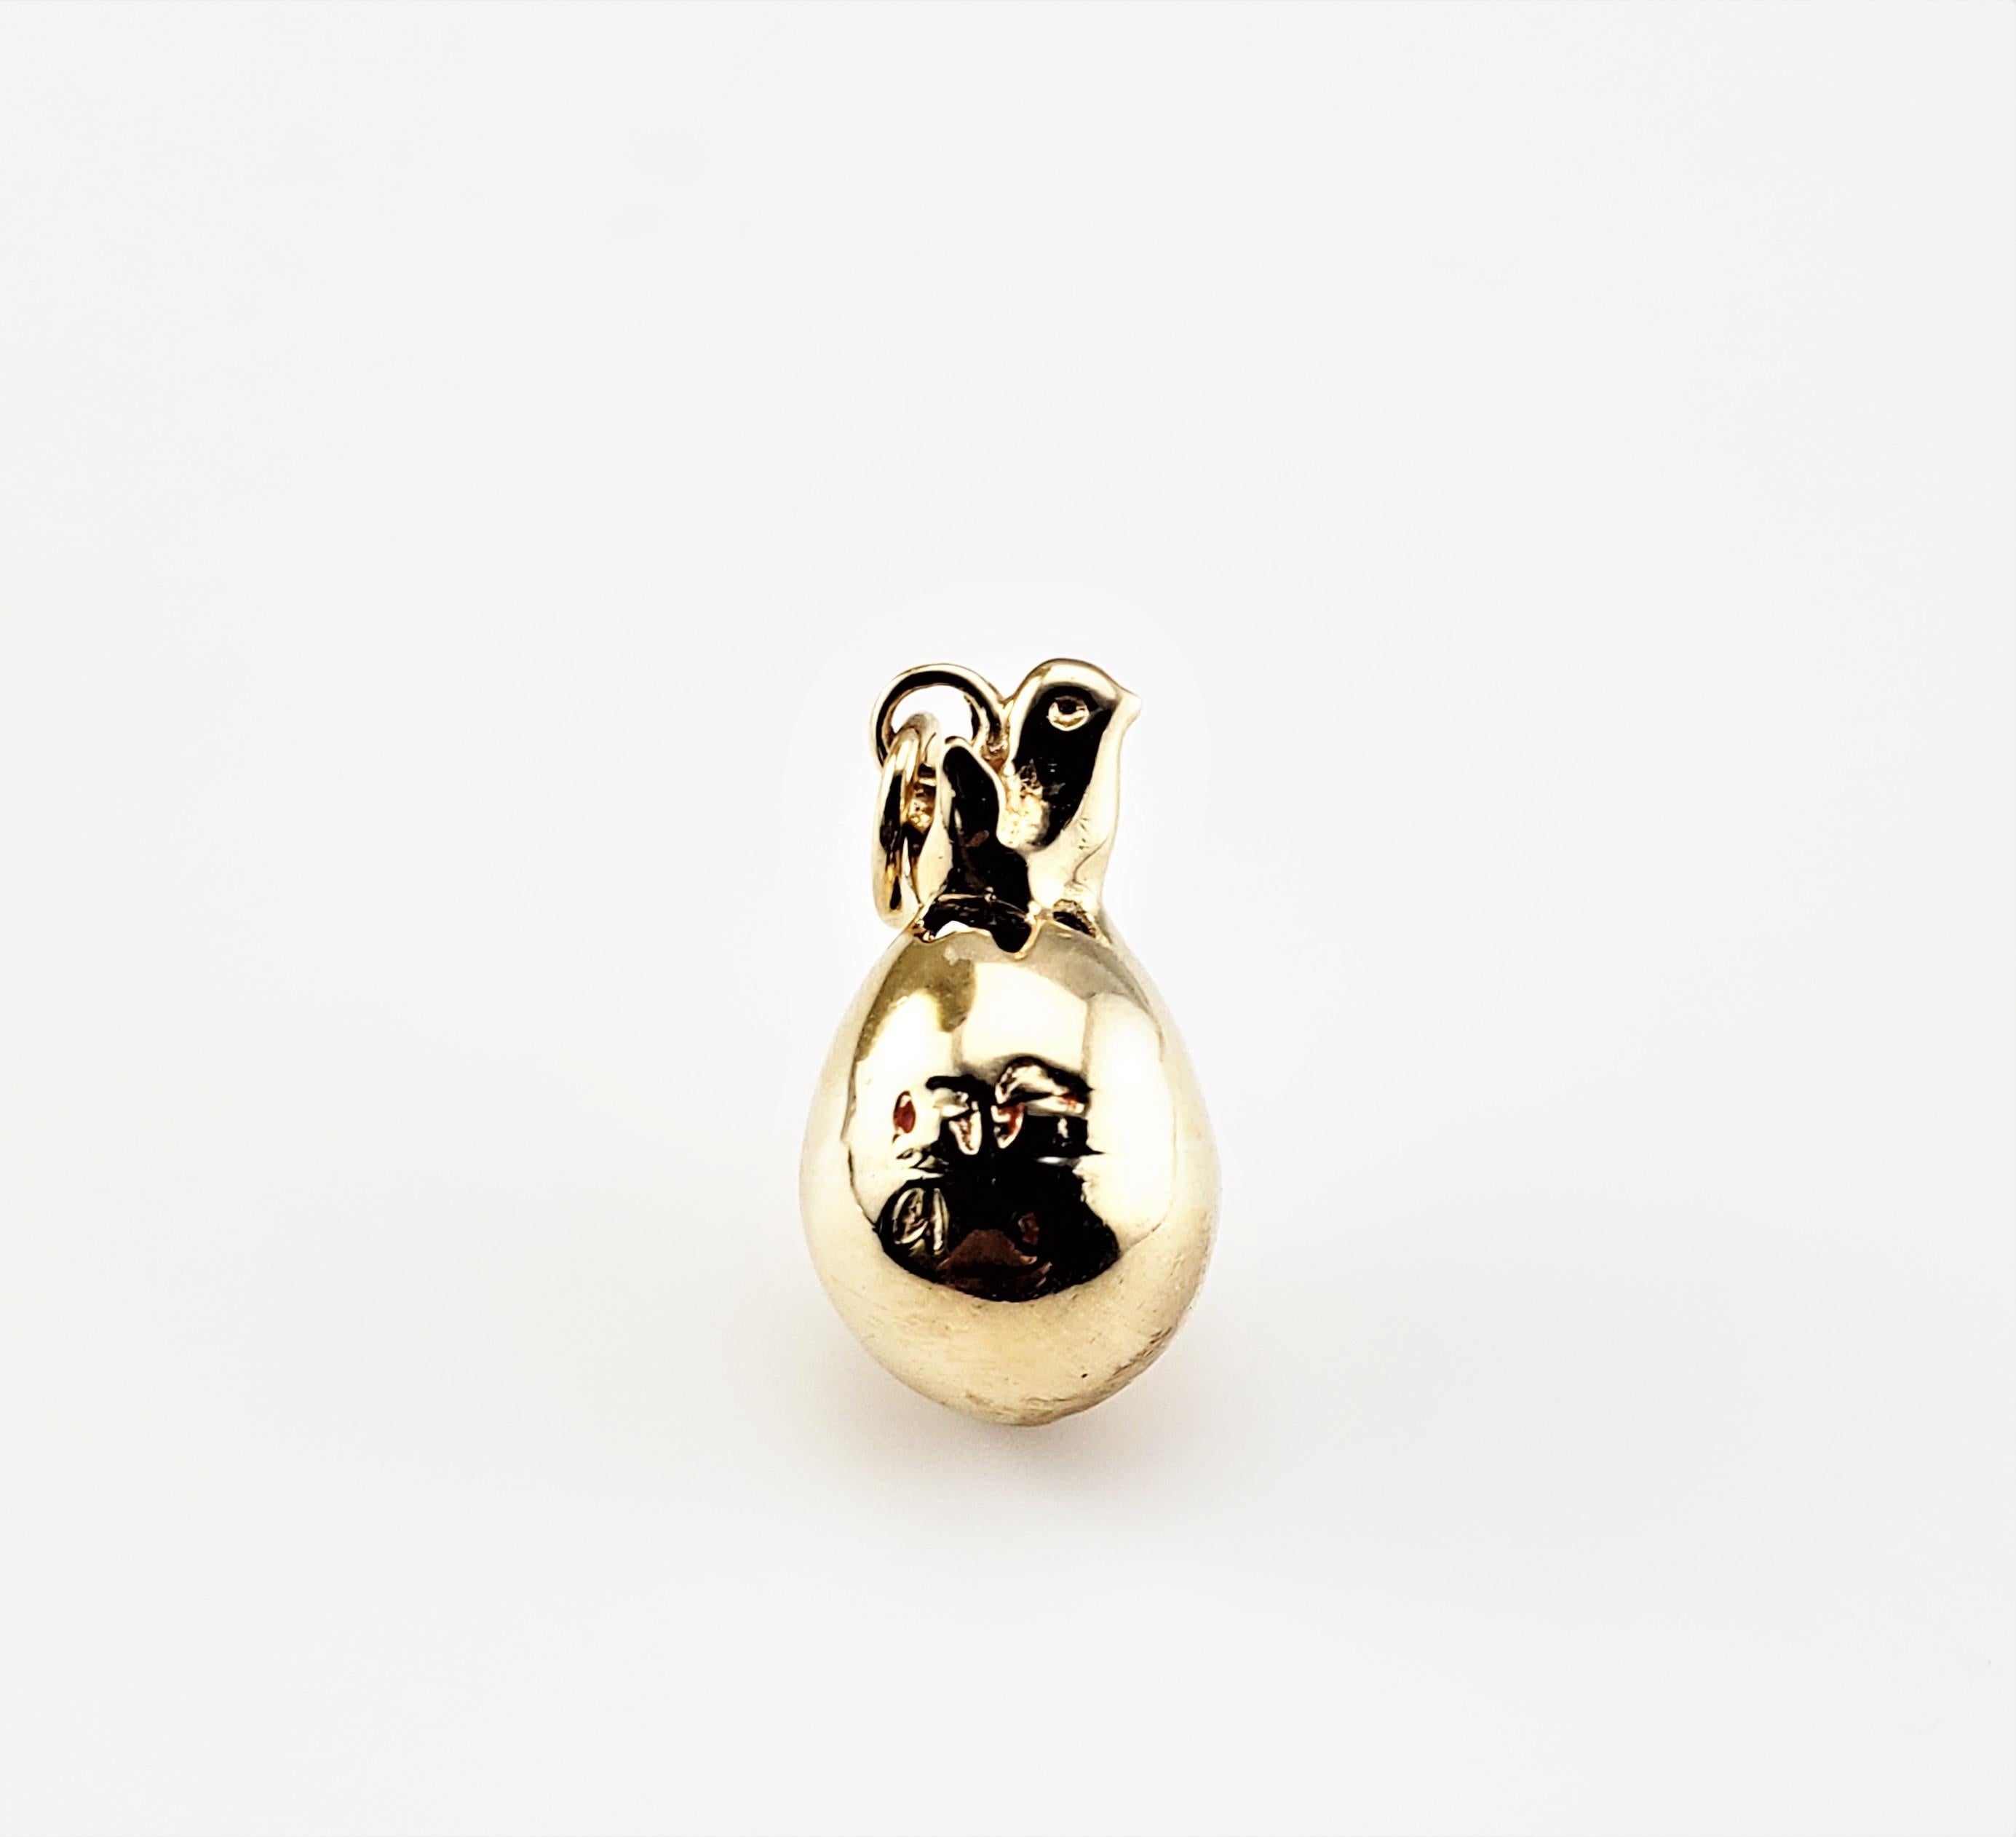 14 Karat Yellow Gold Chick and Egg Charm-

Which came first?

This lovely 3D chick and egg charm is beautifully crafted in 14K yellow gold.

*Chain not included

Size:  18 mm x 10  mm (actual charm)

Weight:  2.1 dwt. /  3.4 gr.

Stamped:  14K

Very